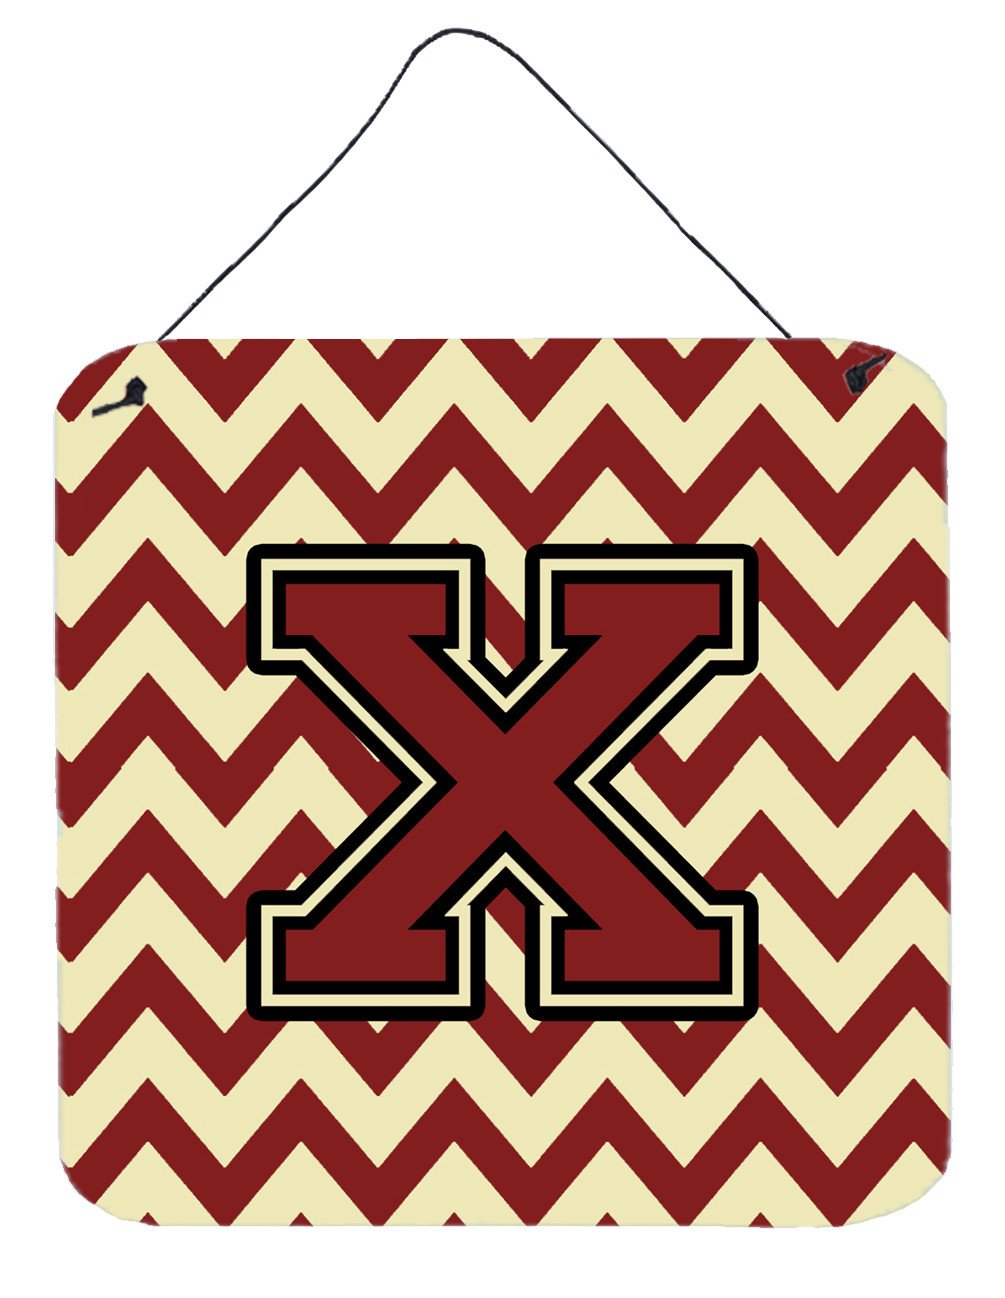 Letter X Chevron Maroon and Gold Wall or Door Hanging Prints CJ1061-XDS66 by Caroline's Treasures